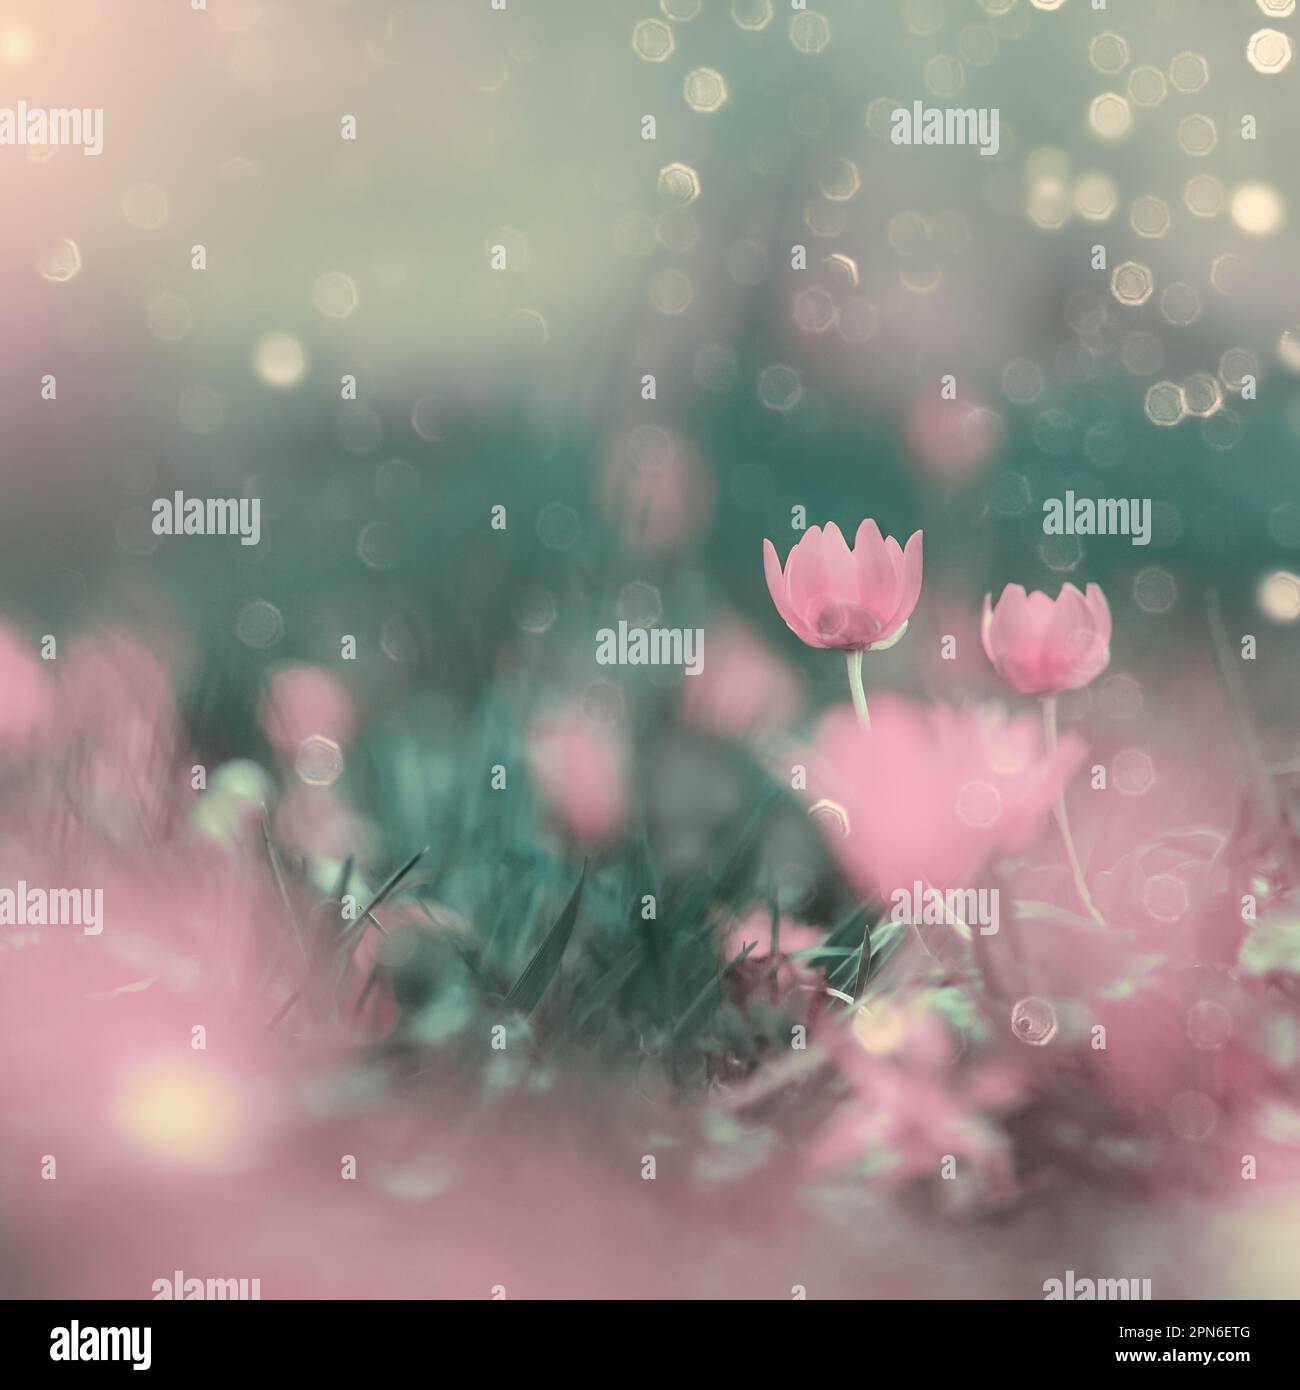 Fairy floral nature background with pink flowers and bokeh Stock Photo